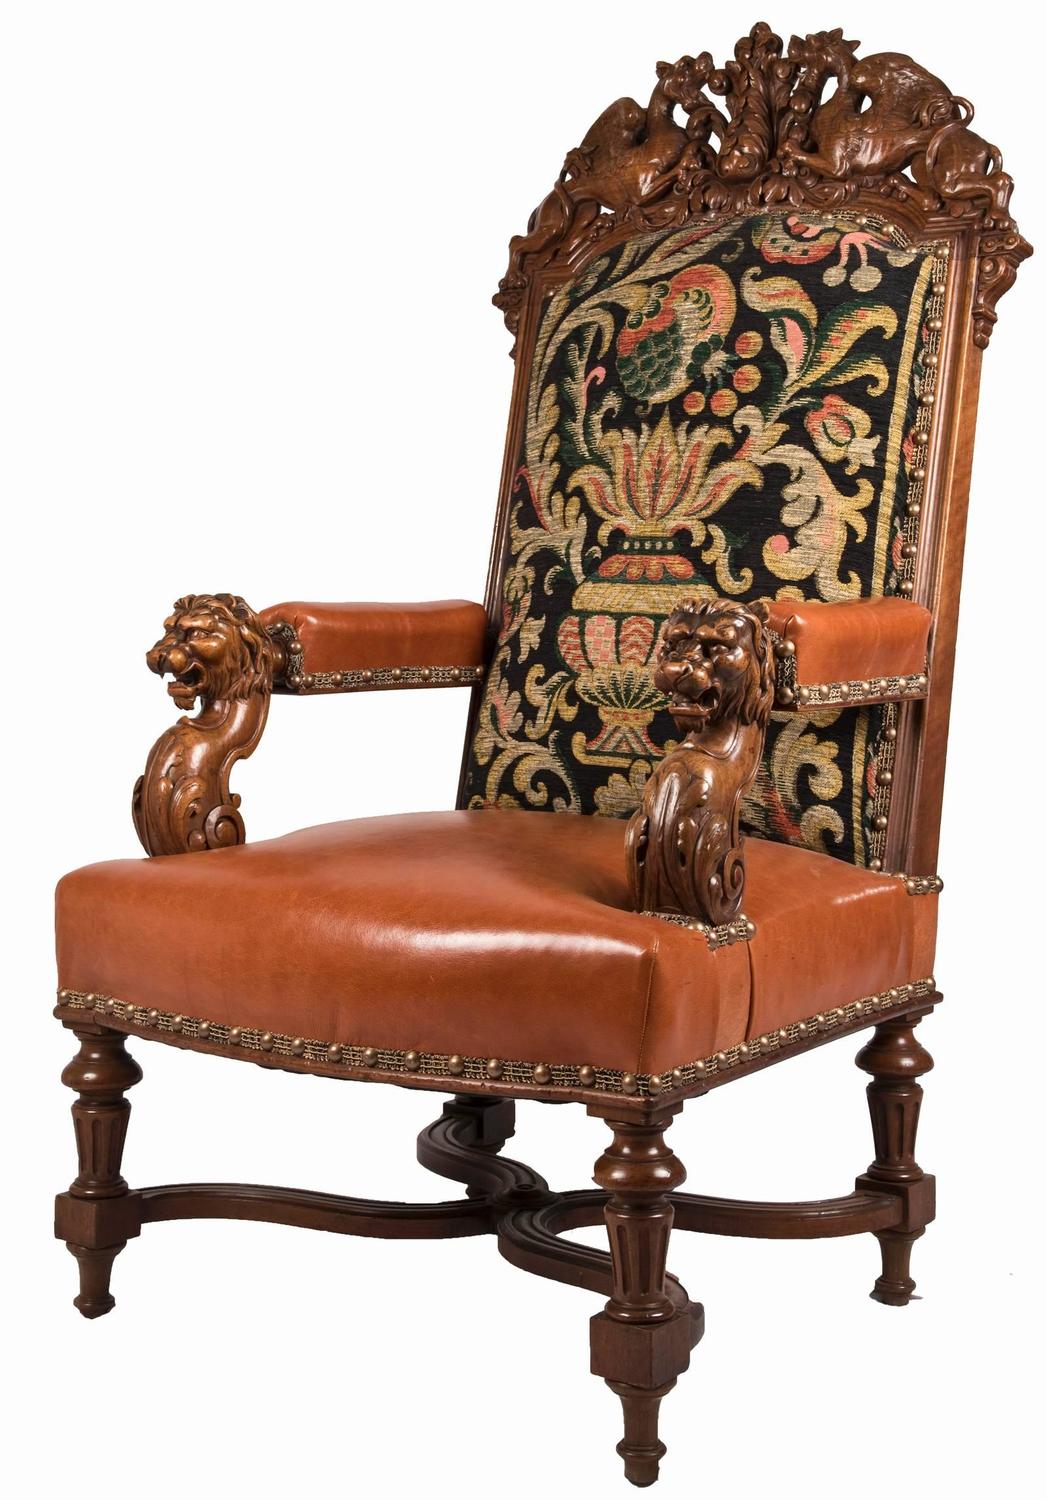 Pair of 19th Century Louis XIV Style Fauteuil Walnut Chairs at 1stdibs